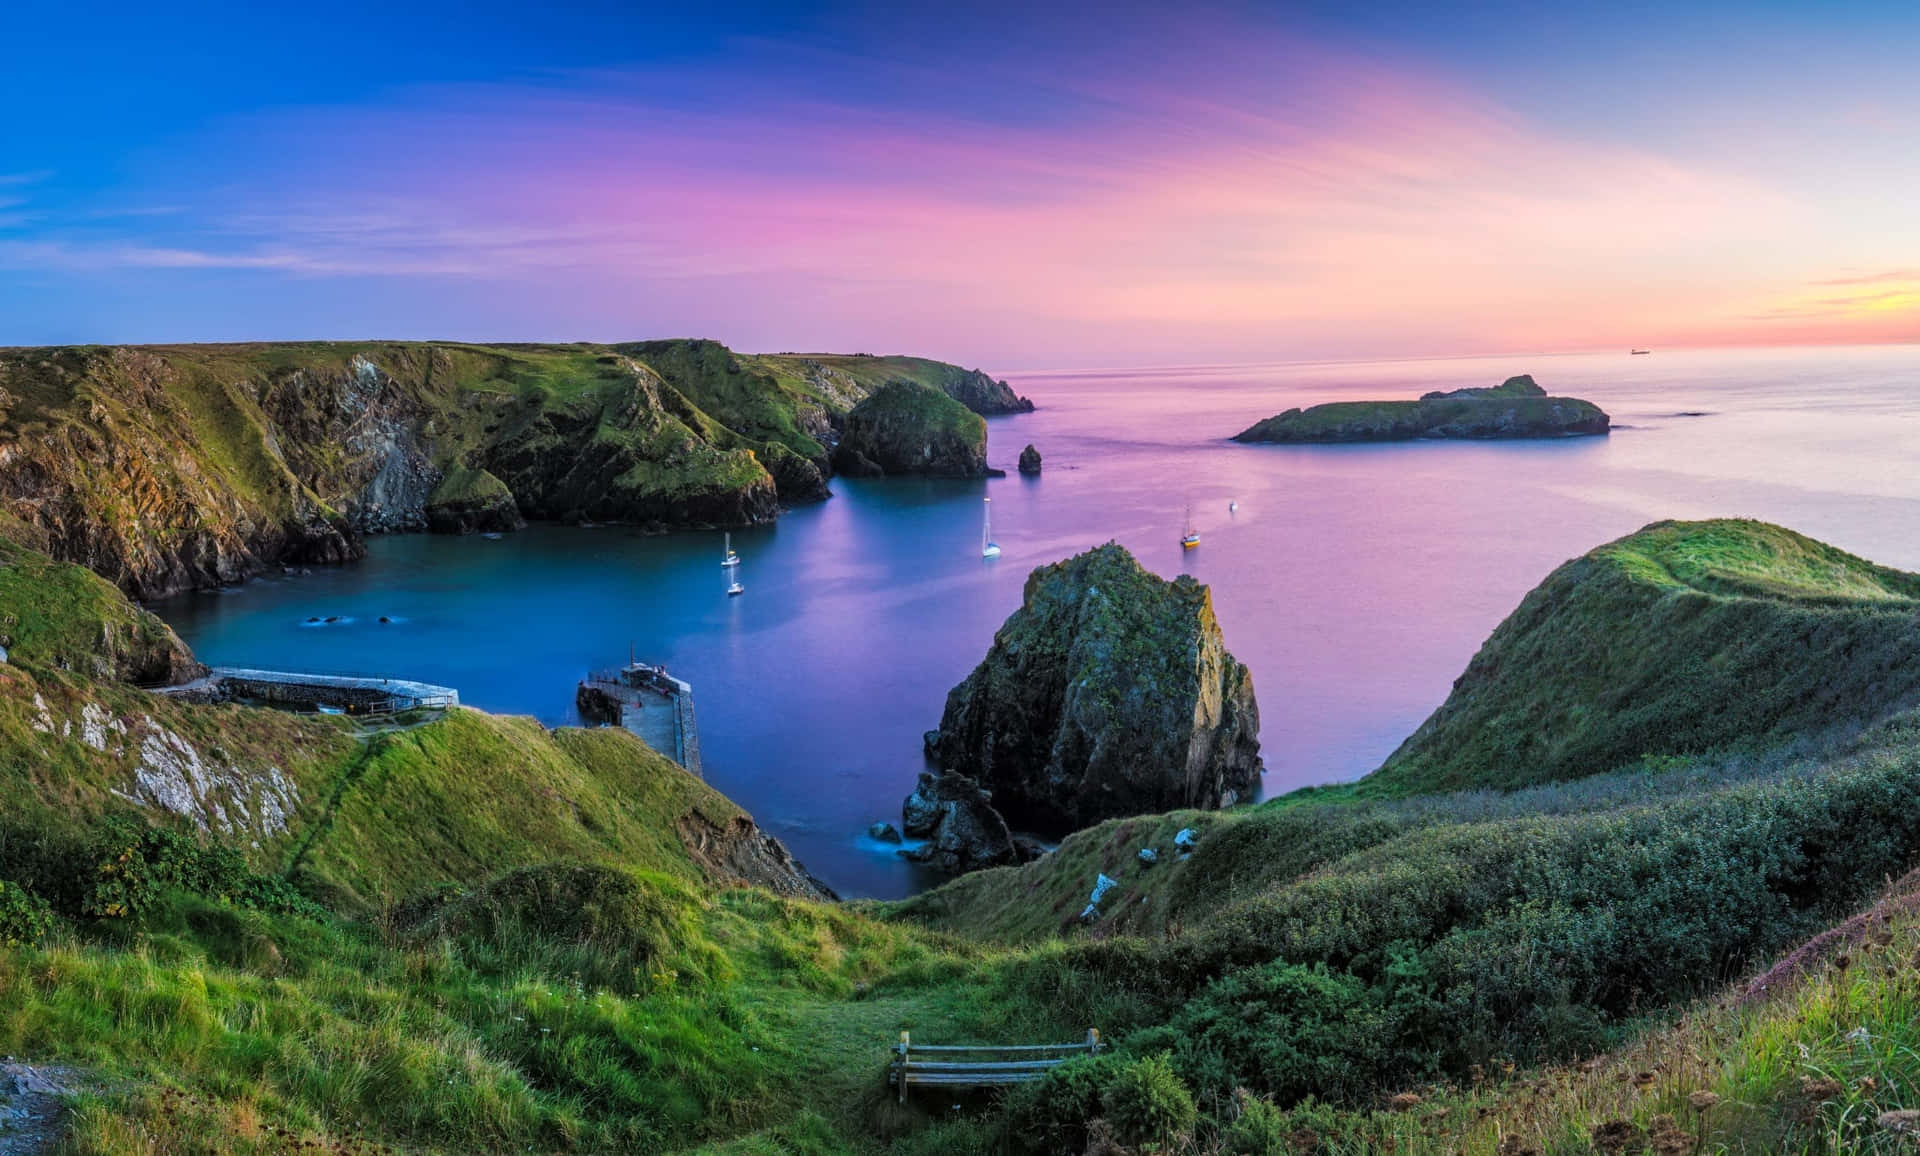 Explore the beauty of the United Kingdom